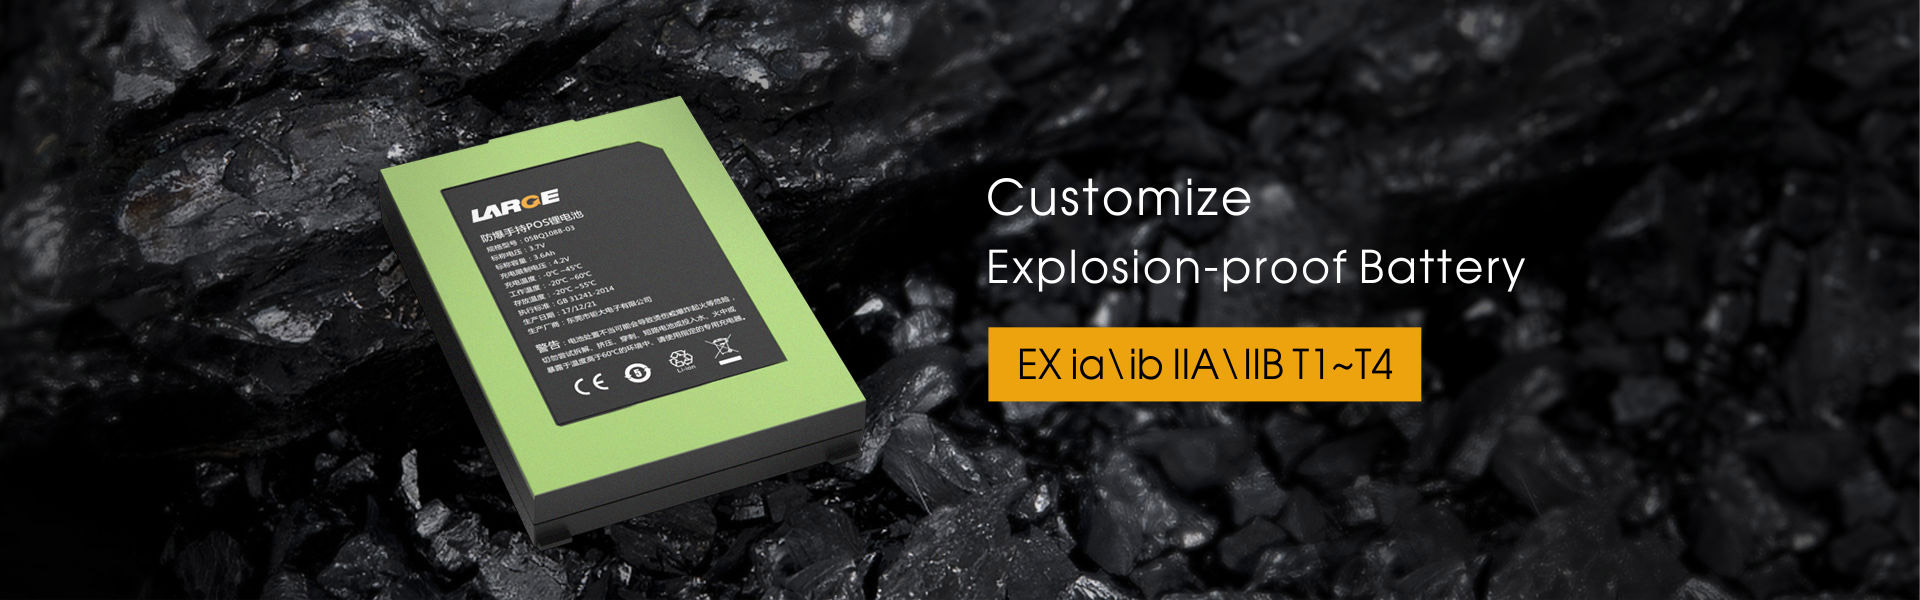 Explosion-proof Battery